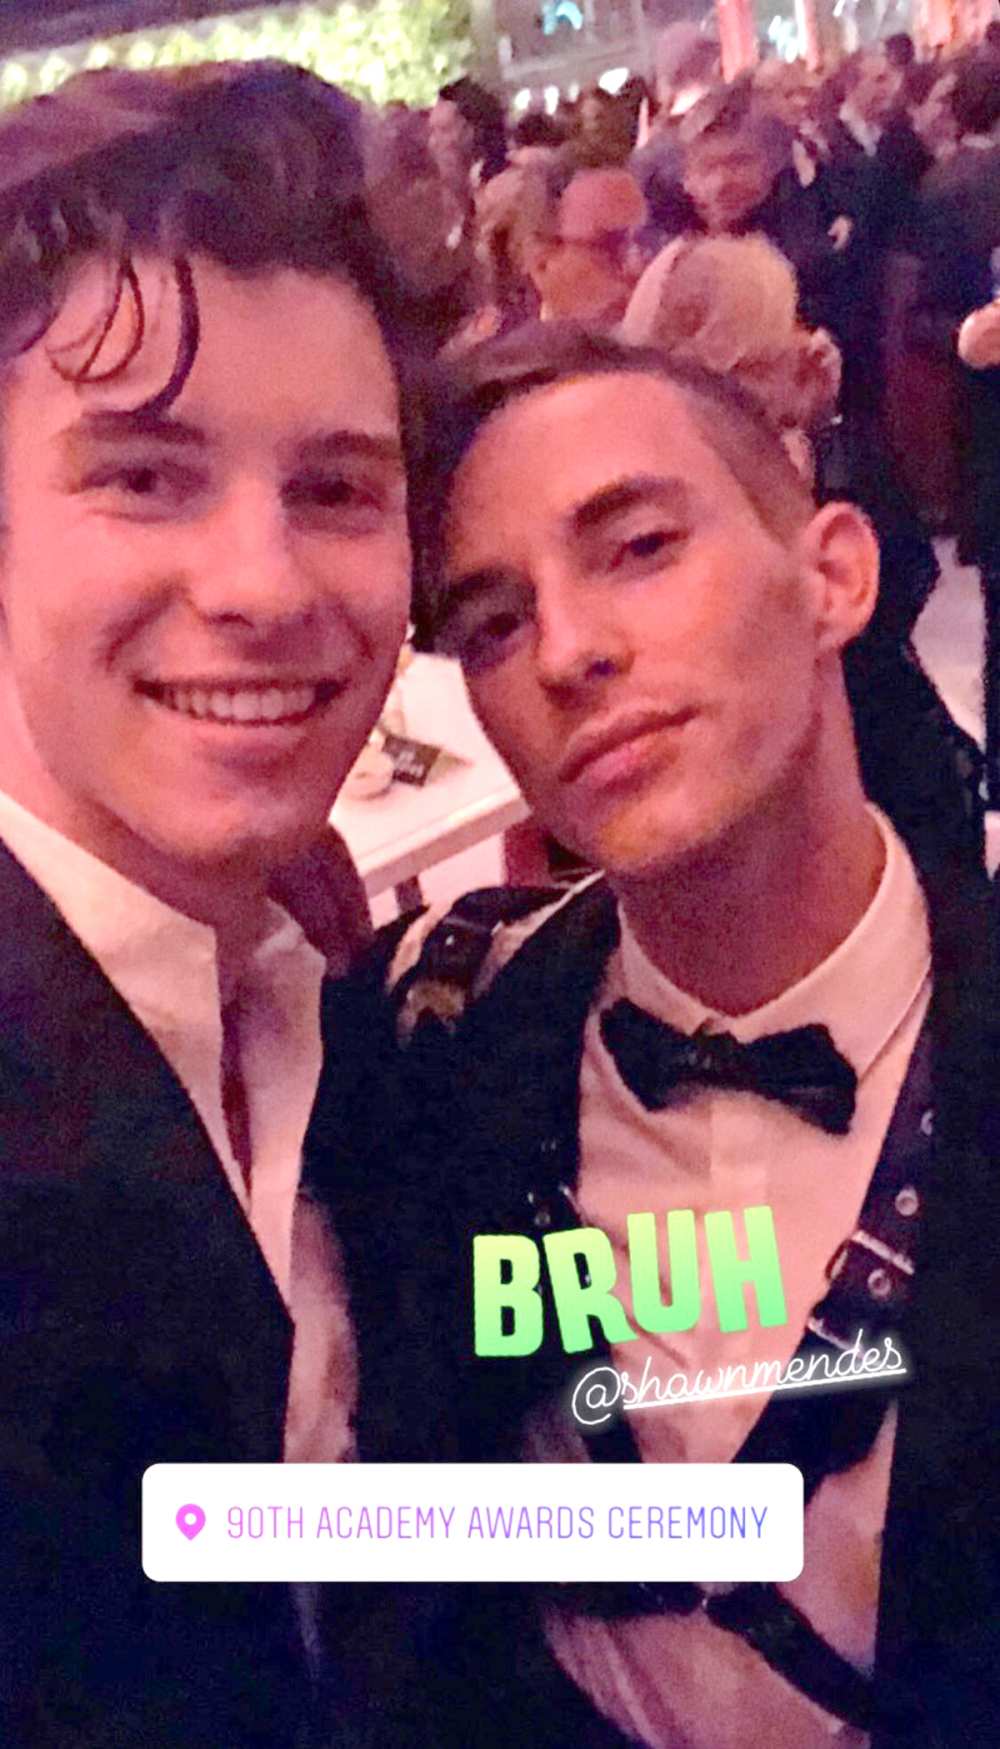 Adam Rippon and Shawn Mendes